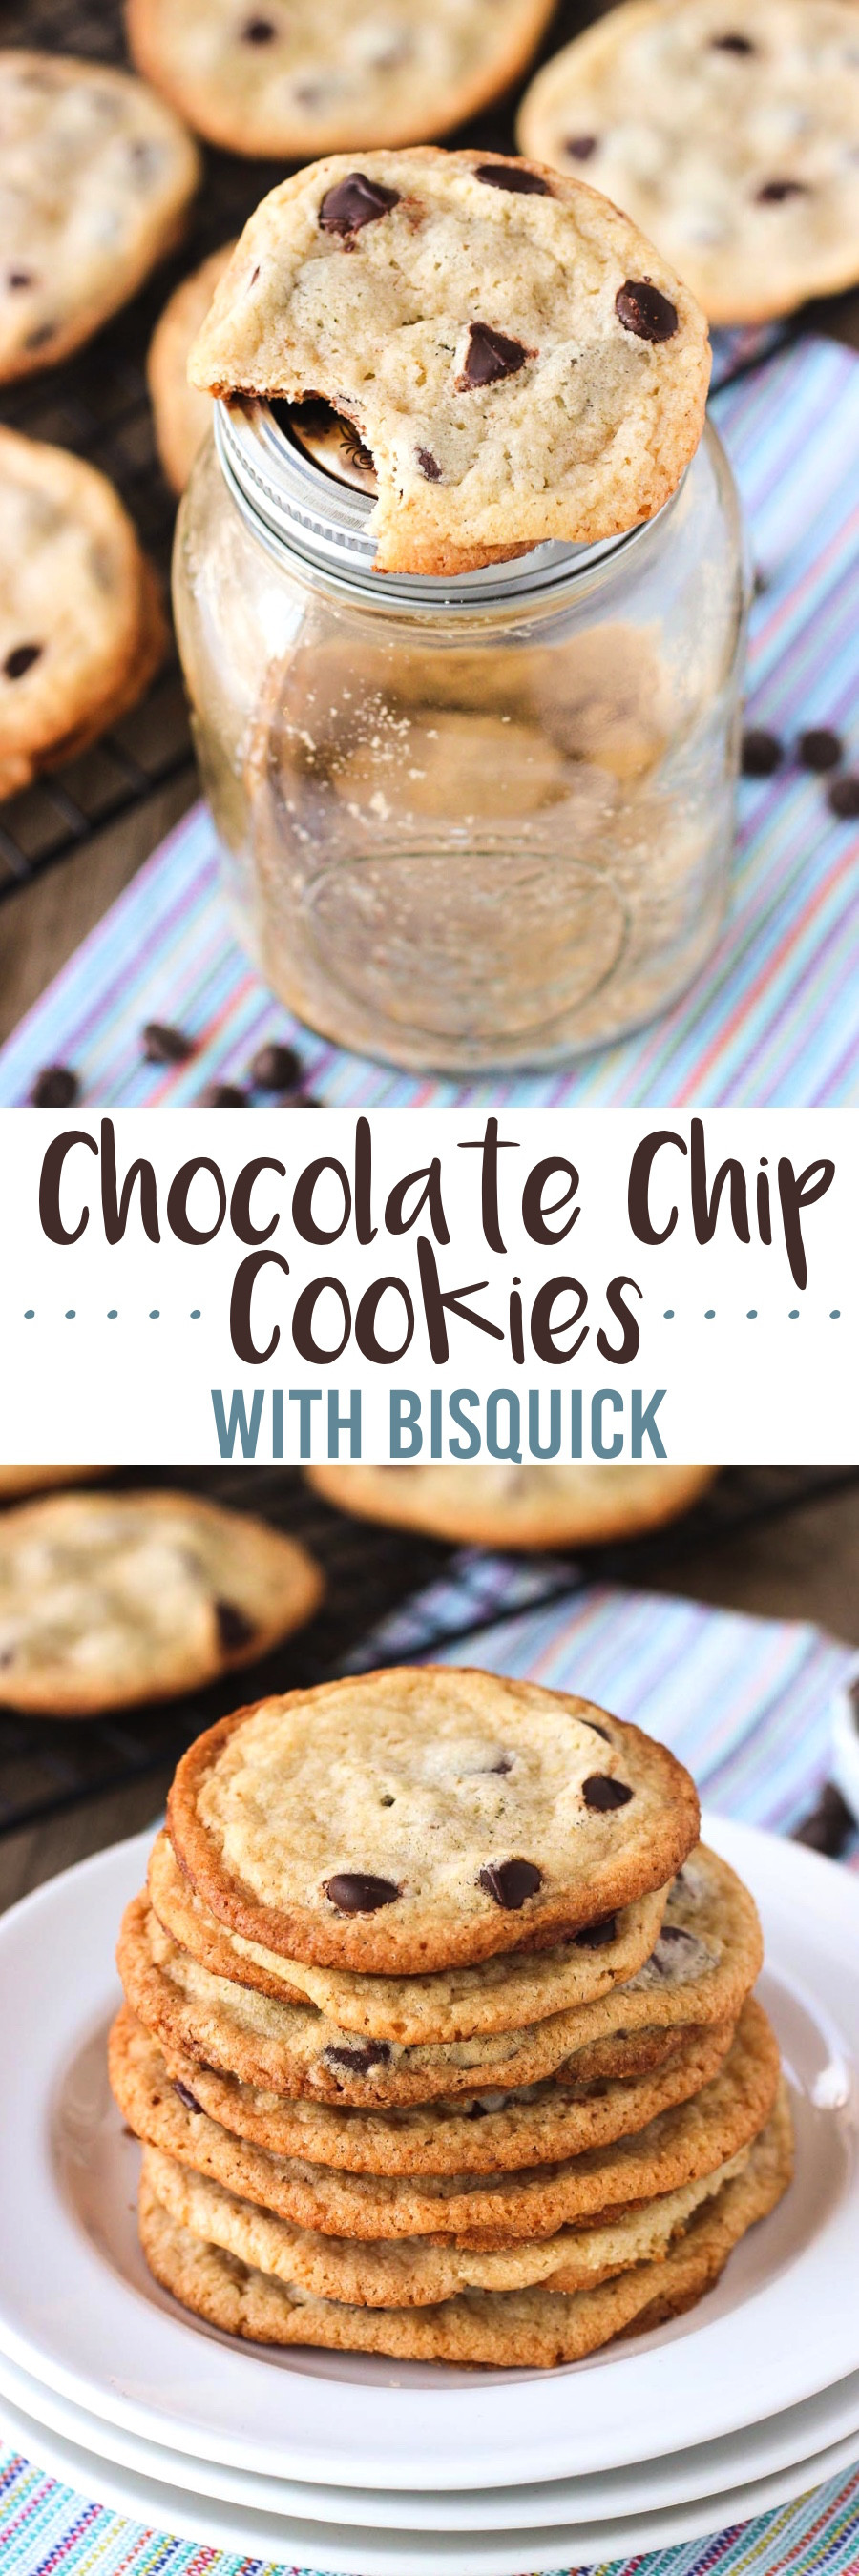 Bisquick Chocolate Chip Cookies
 Thin and Chewy Chocolate Chip Cookies with Bisquick